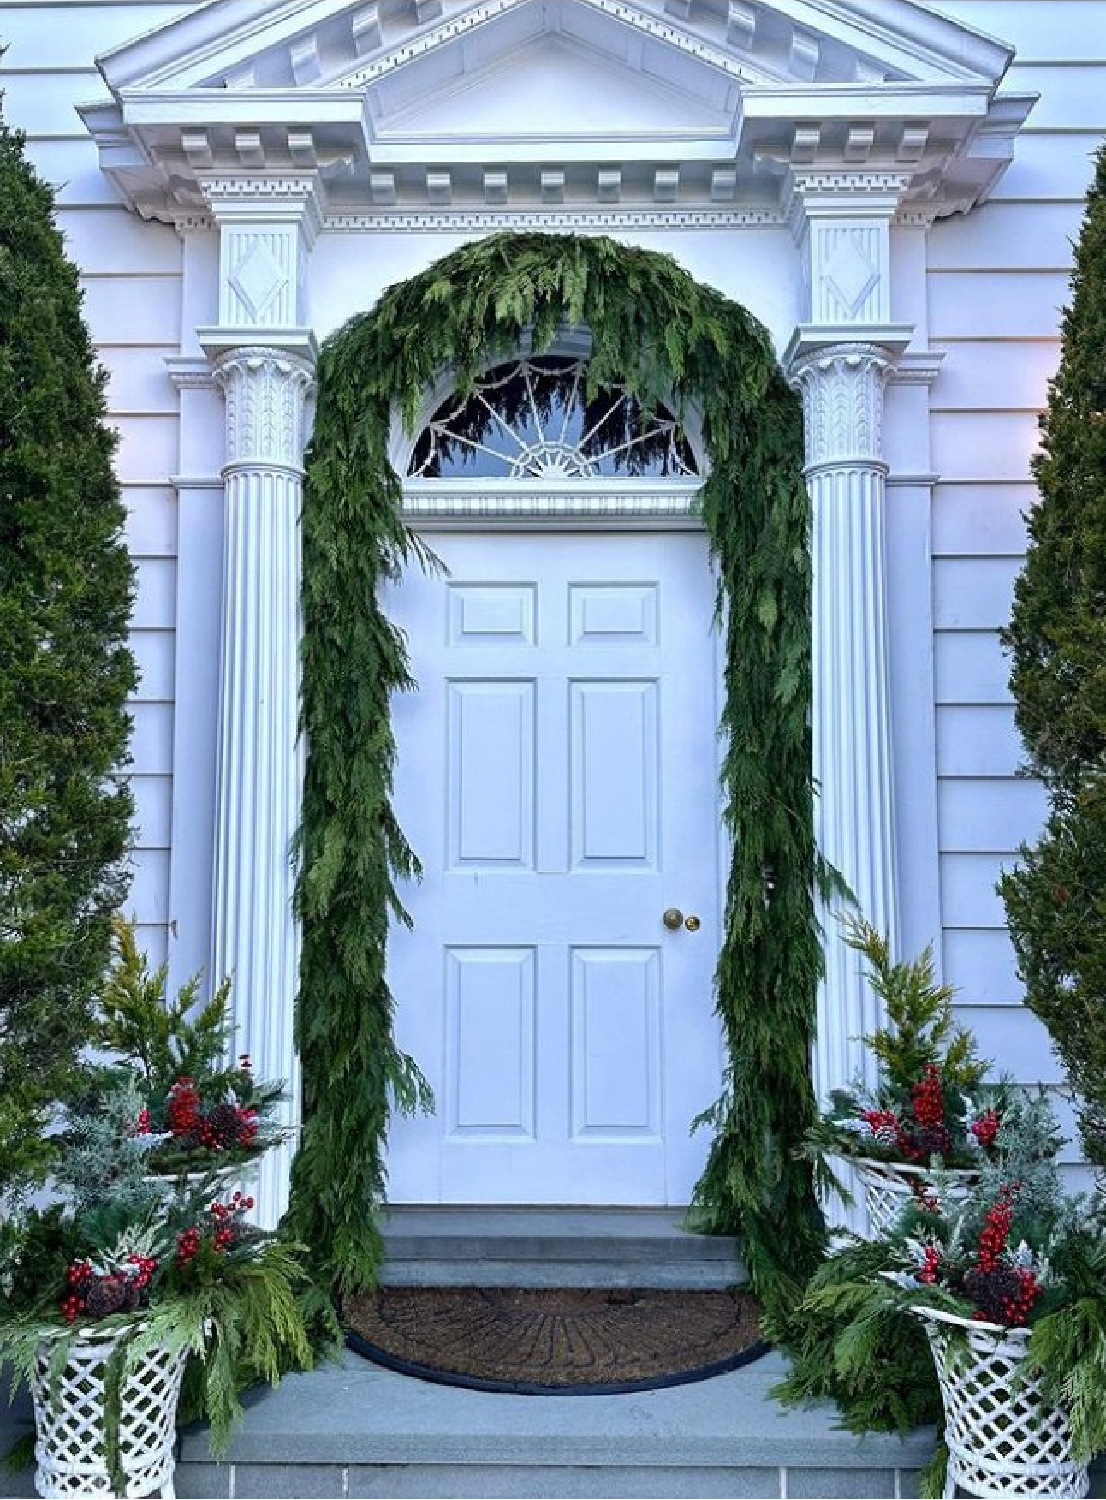 Breathtaking holiday porch and greenery on a home with classic architecture - @theenchantedhome. #christmasgarland #christmasporch